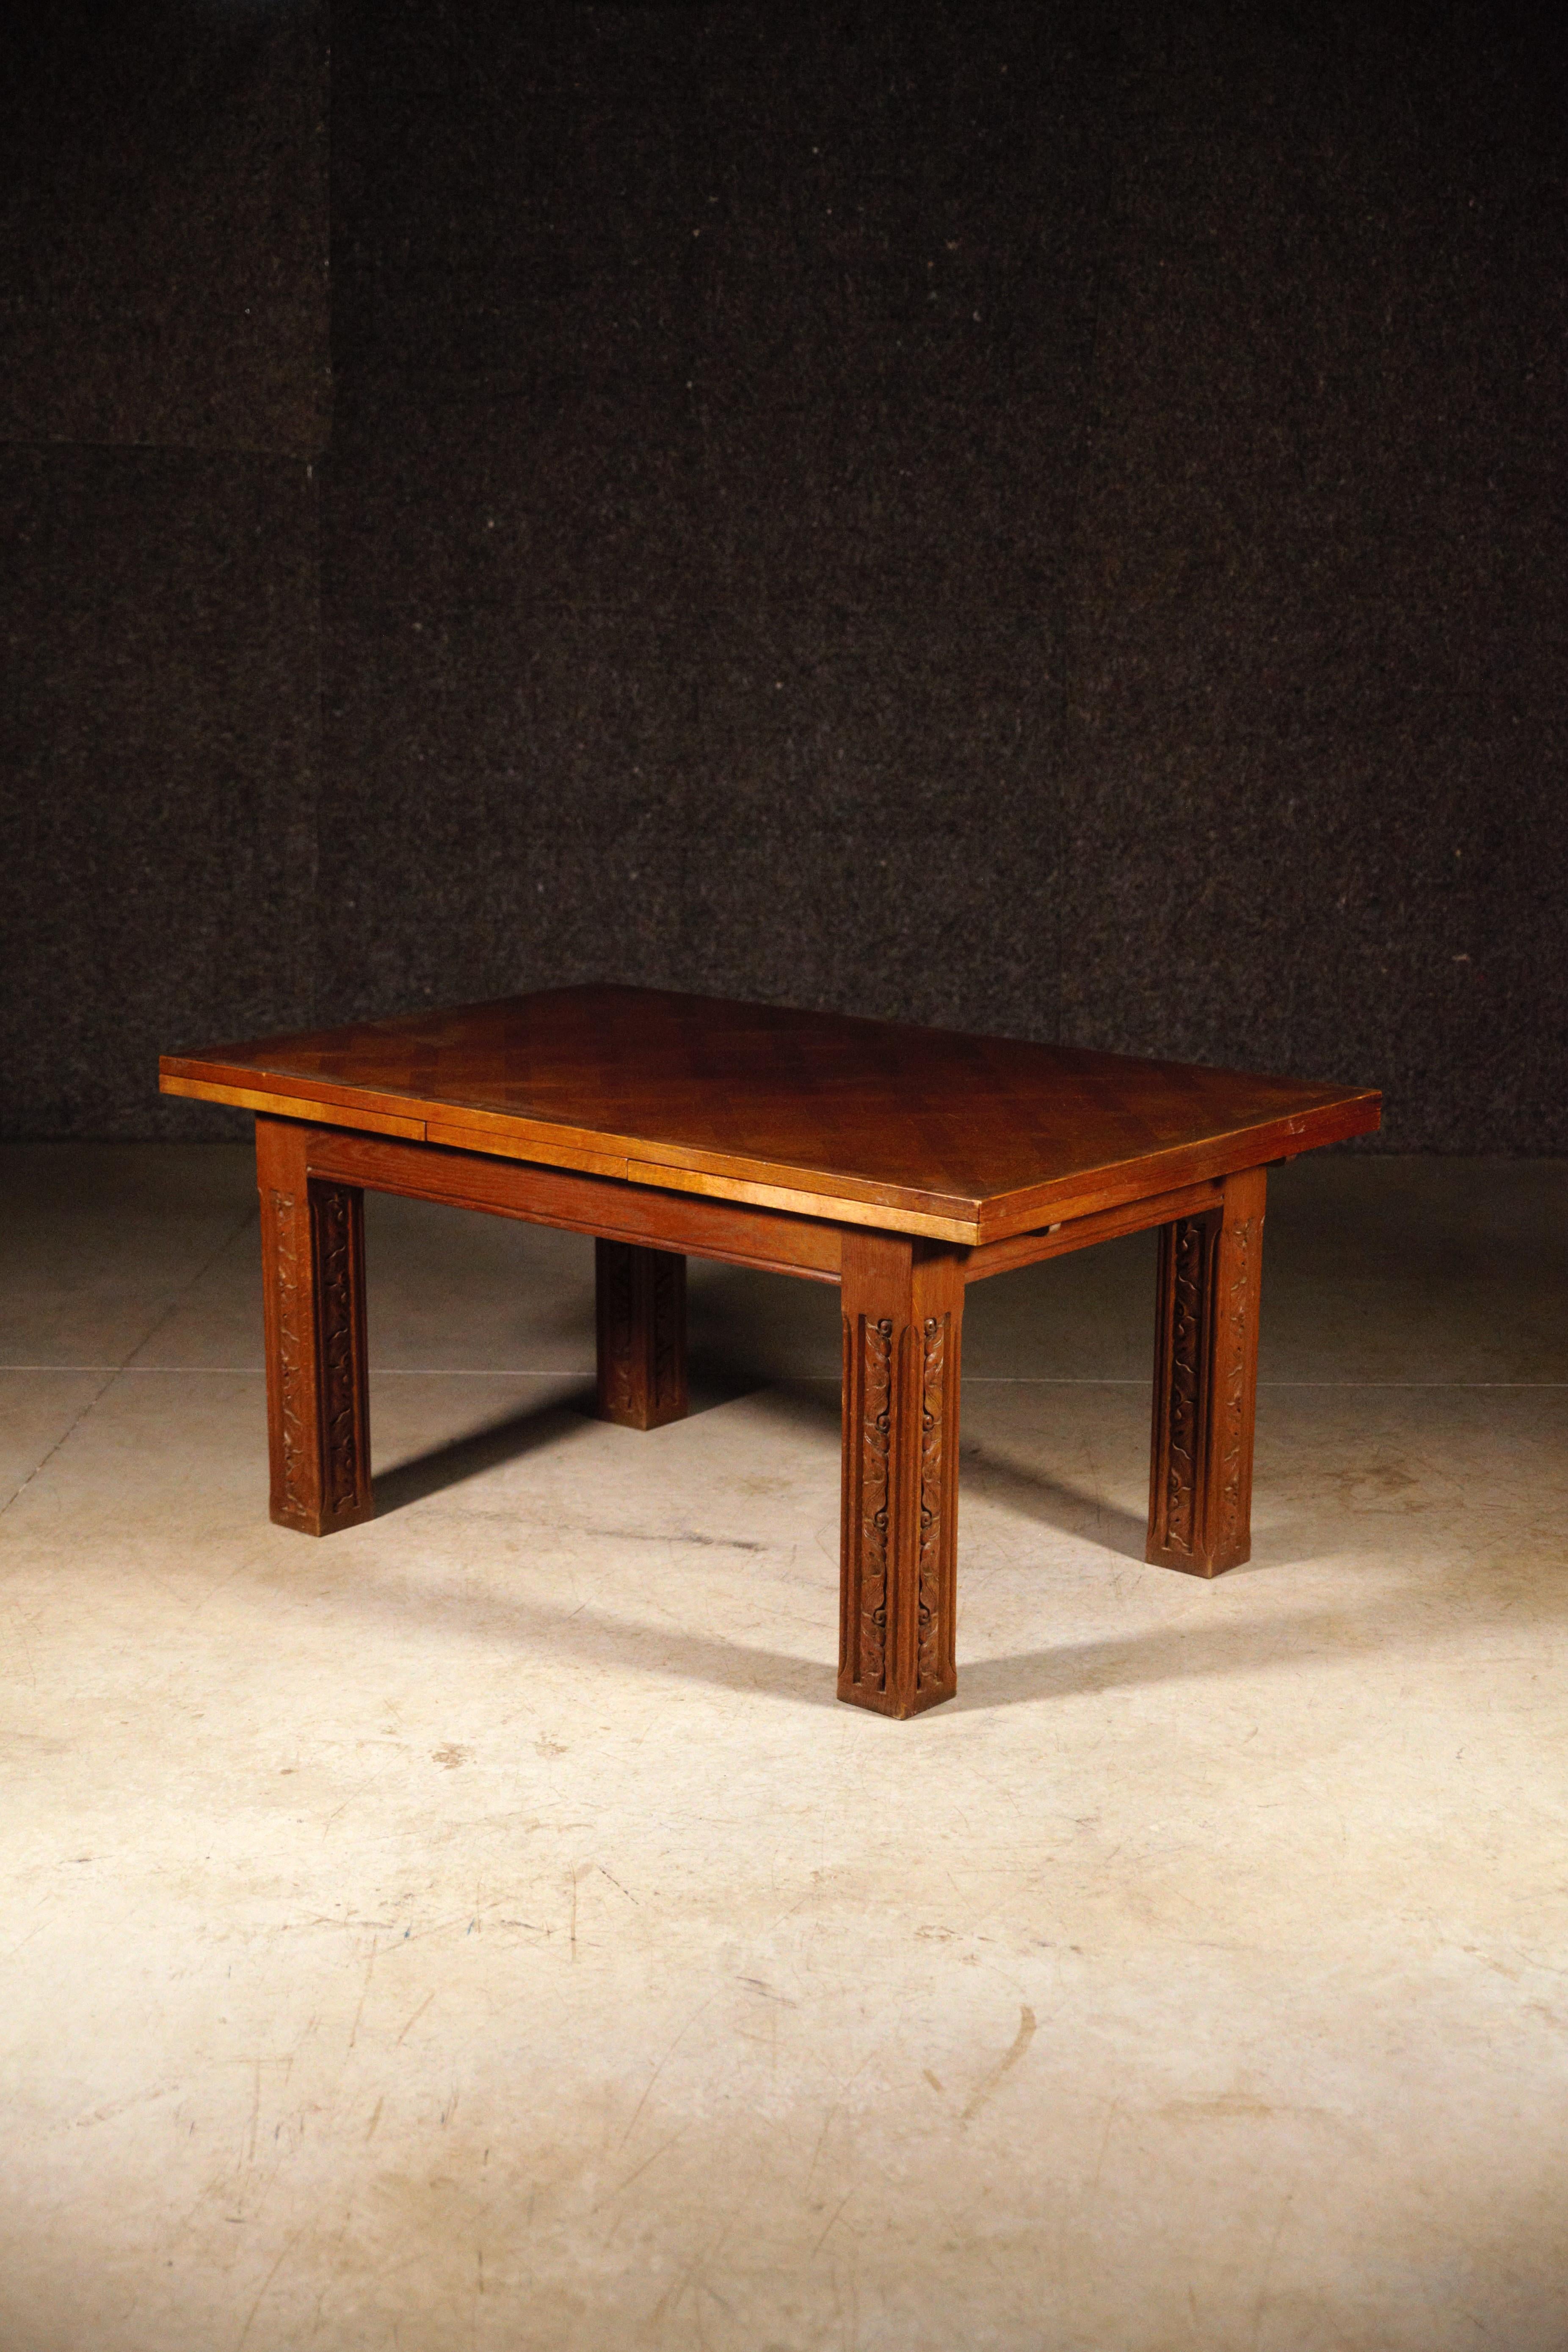 A dining table by Joseph Savina.

With two extensions : one extension : 60cm  Long with two extensions : 280cm

Model : Saint Gonéry

Oak wood